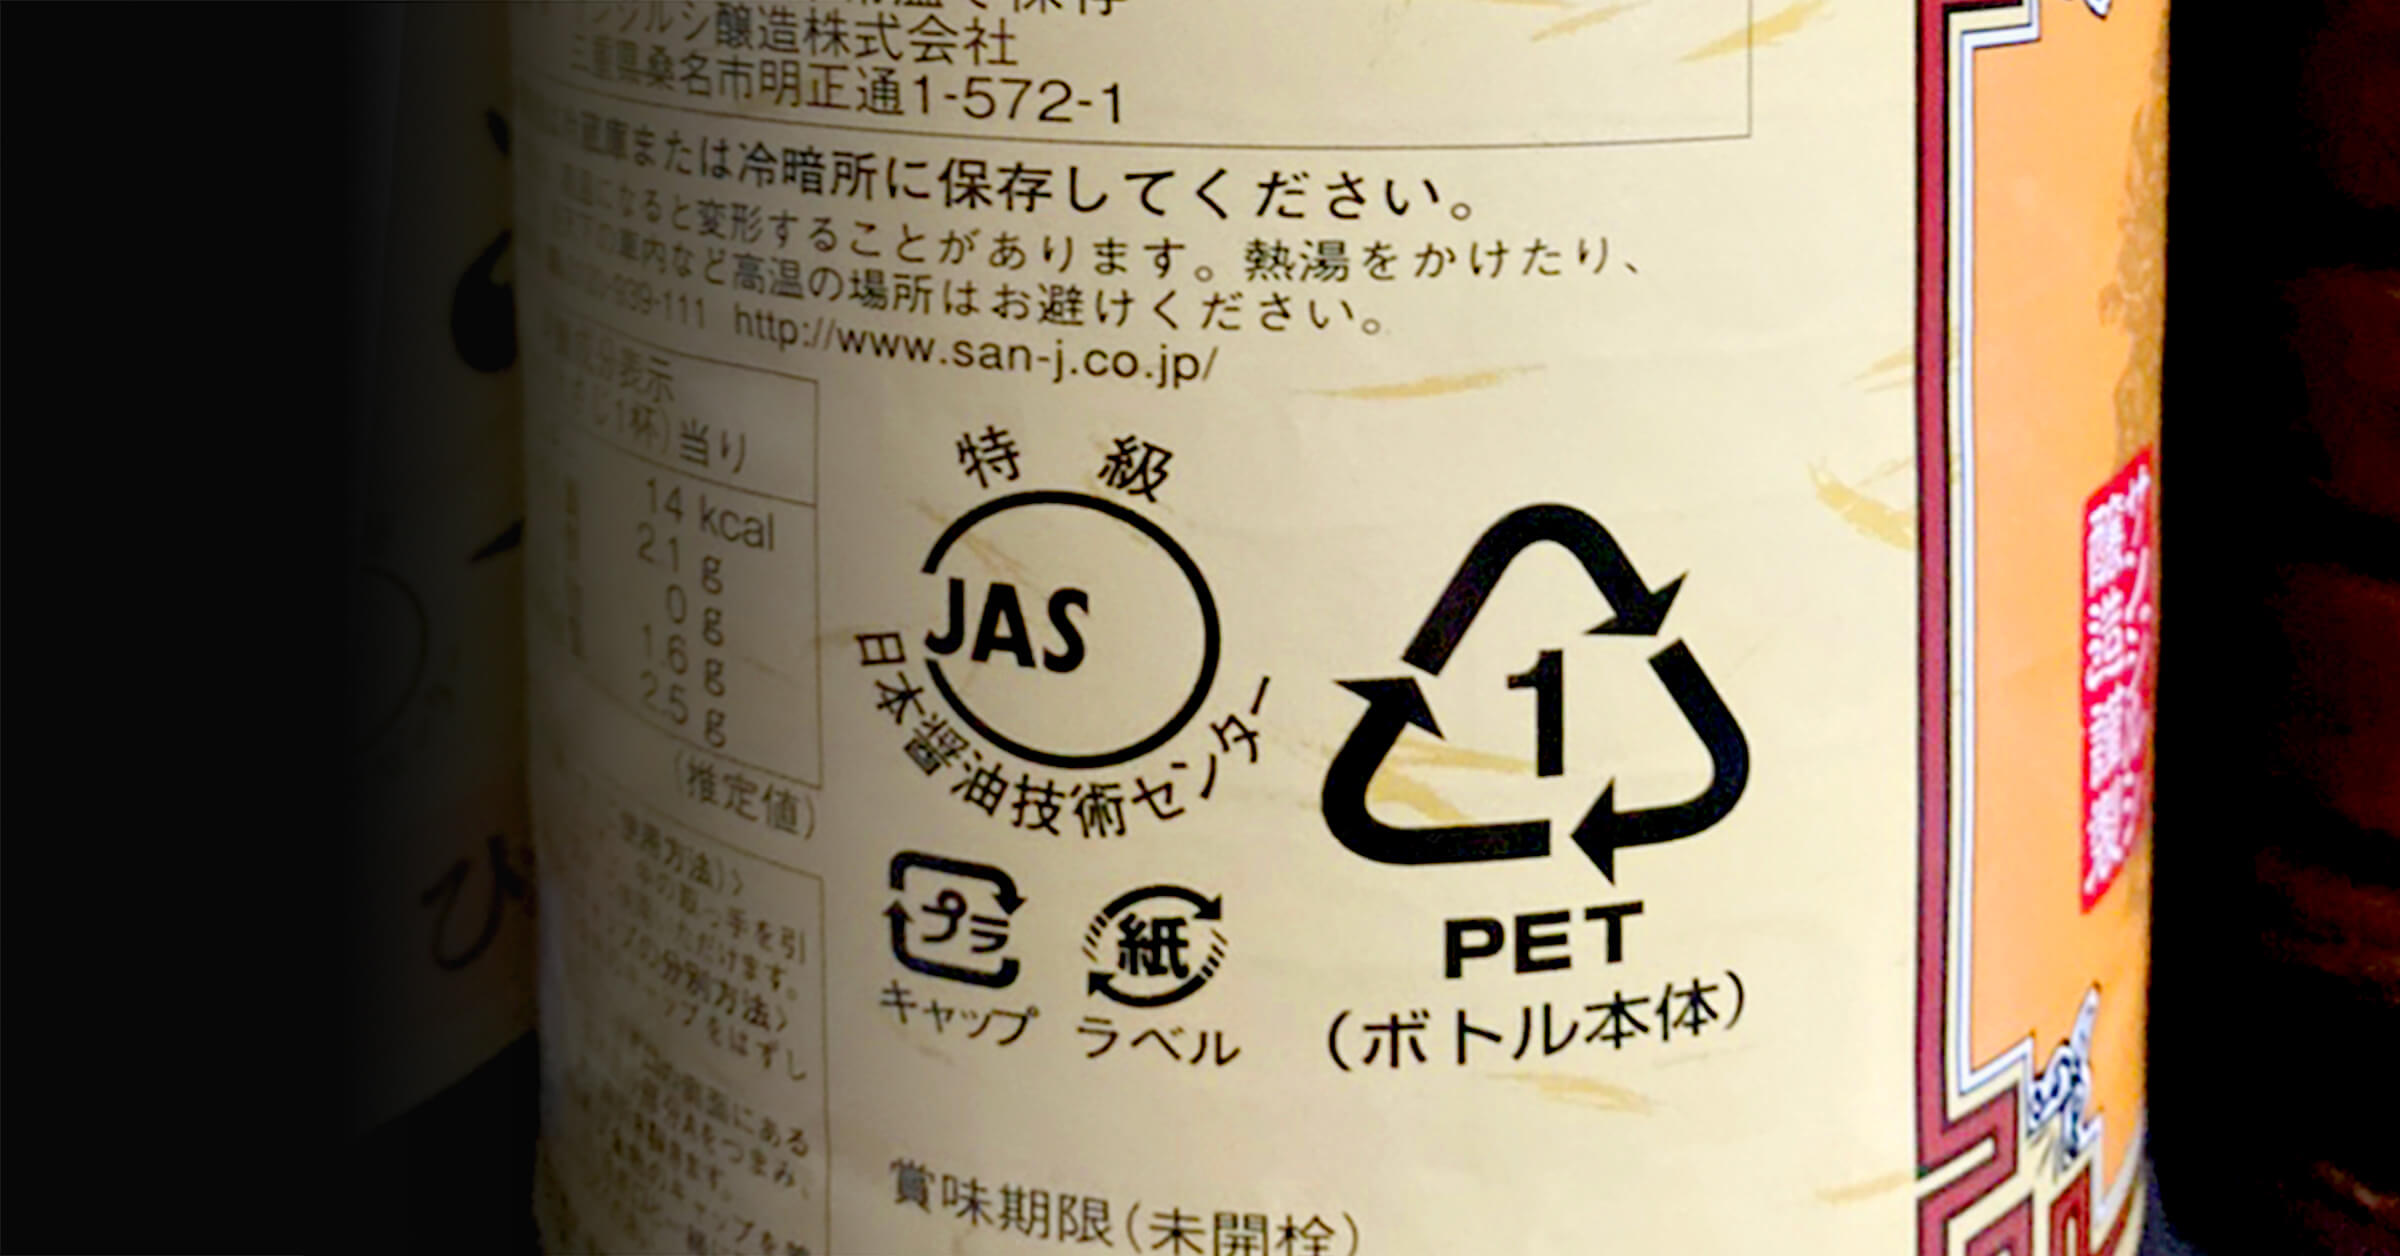 JAS logo on the bottle of soy sauce